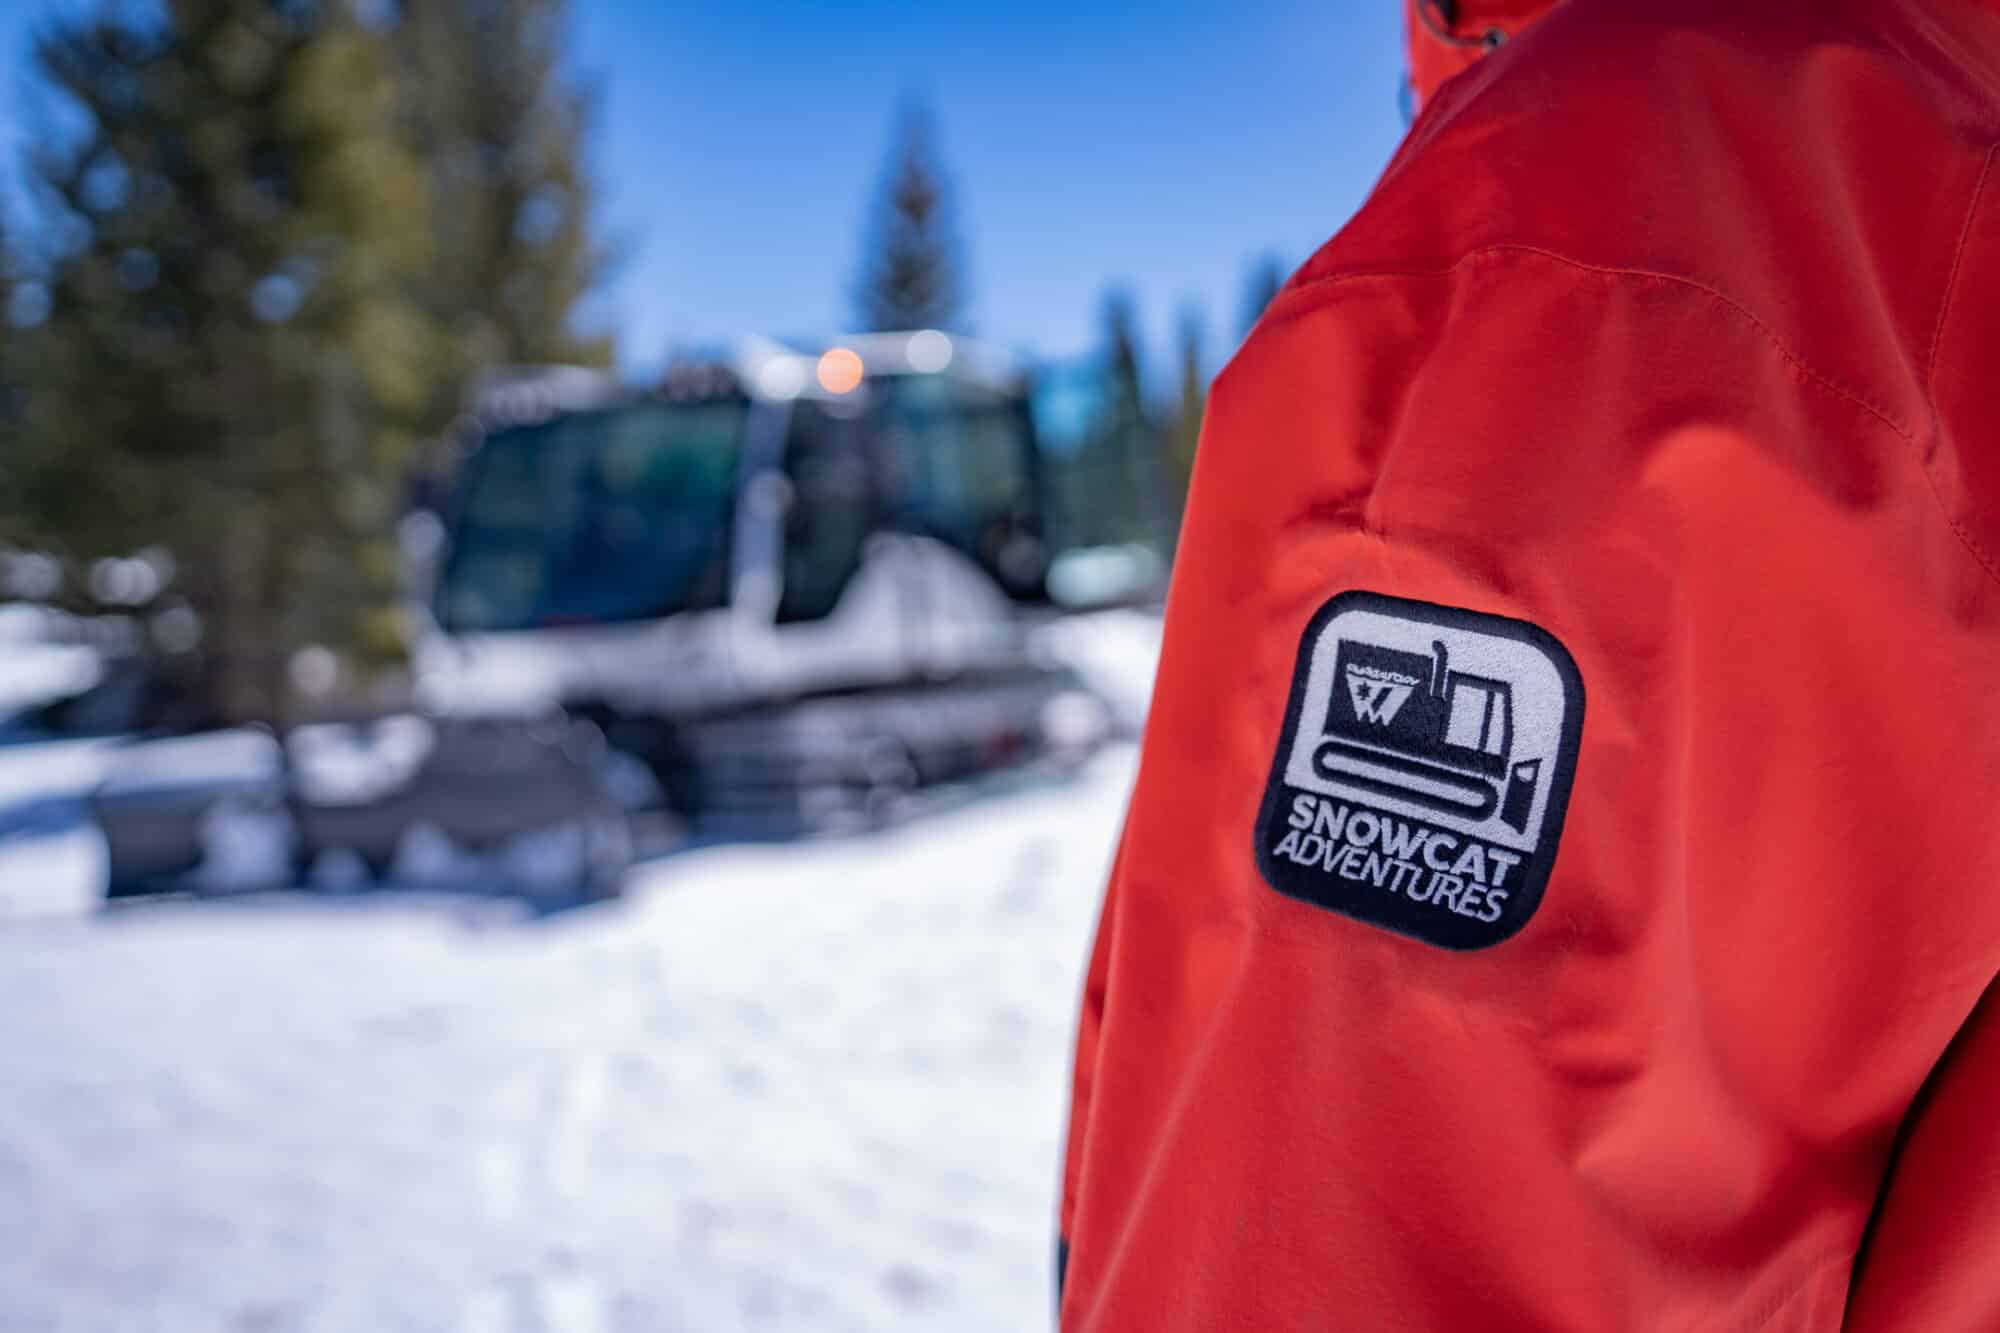 Close up of snowcat adventures jacket with scenic snowcat out of focus in the background